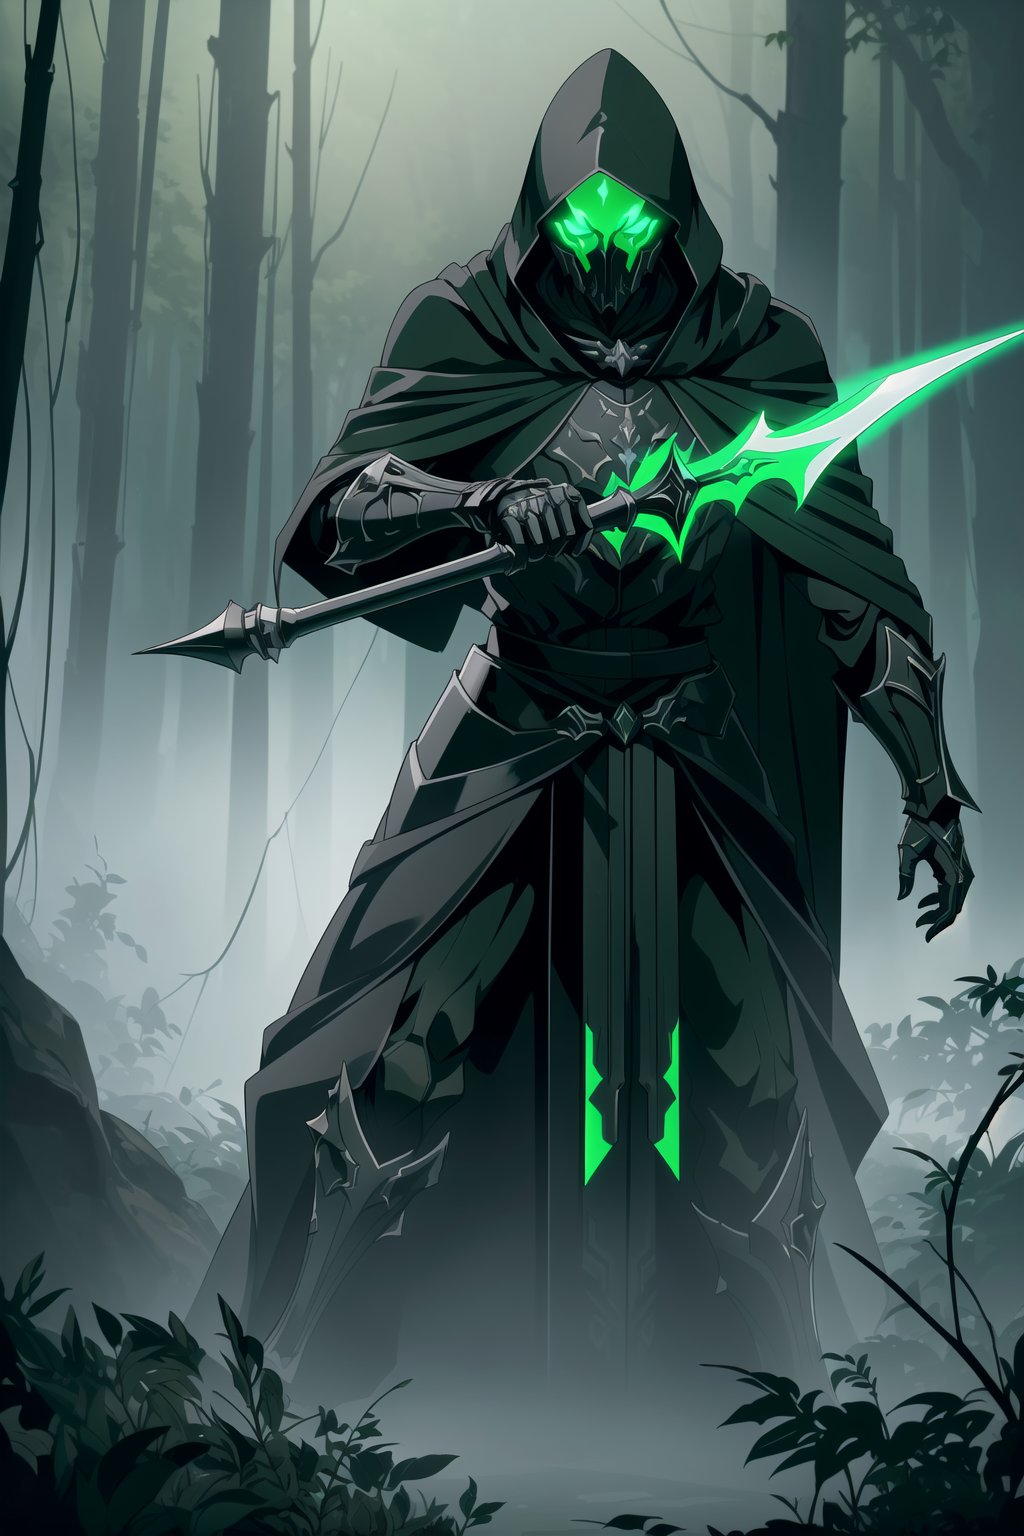 (Masterpiece, Best Quality), (Grim Reaper in Warframe Style Armor), (Masculine Appearance:1.4), (Muscular Frame Build:1.2), (Glowing Green Eyes), (Wearing Green and Black Grim Reaper-Themed Armored Robe, Black Hood, and Black Flowing Cloak:1.4), (Foggy Forest at Night:1.4), (Action Pose:1.4), Centered, (Half Body Shot:1.4), (From Front Shot:1.2), Insane Details, Intricate Face Detail, Intricate Hand Details, Cinematic Shot and Lighting, Realistic and Vibrant Colors, Sharp Focus, Ultra Detailed, Realistic Images, Depth of Field, Incredibly Realistic Environment and Scene, Master Composition and Cinematography, castlevania style,castlevania style,WARFRAME